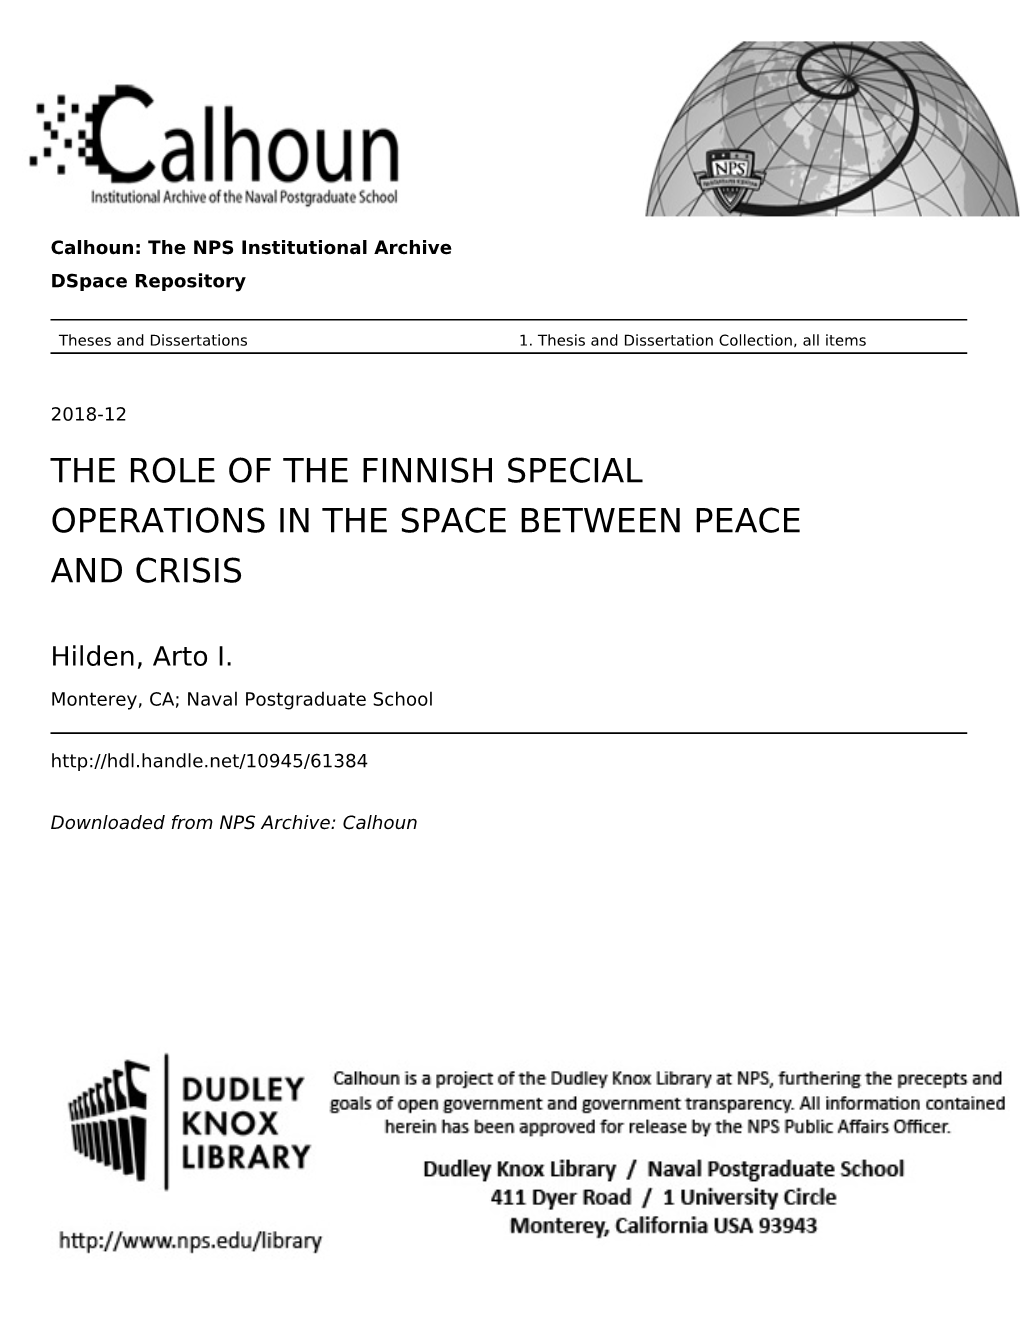 The Role of the Finnish Special Operations in the Space Between Peace and Crisis